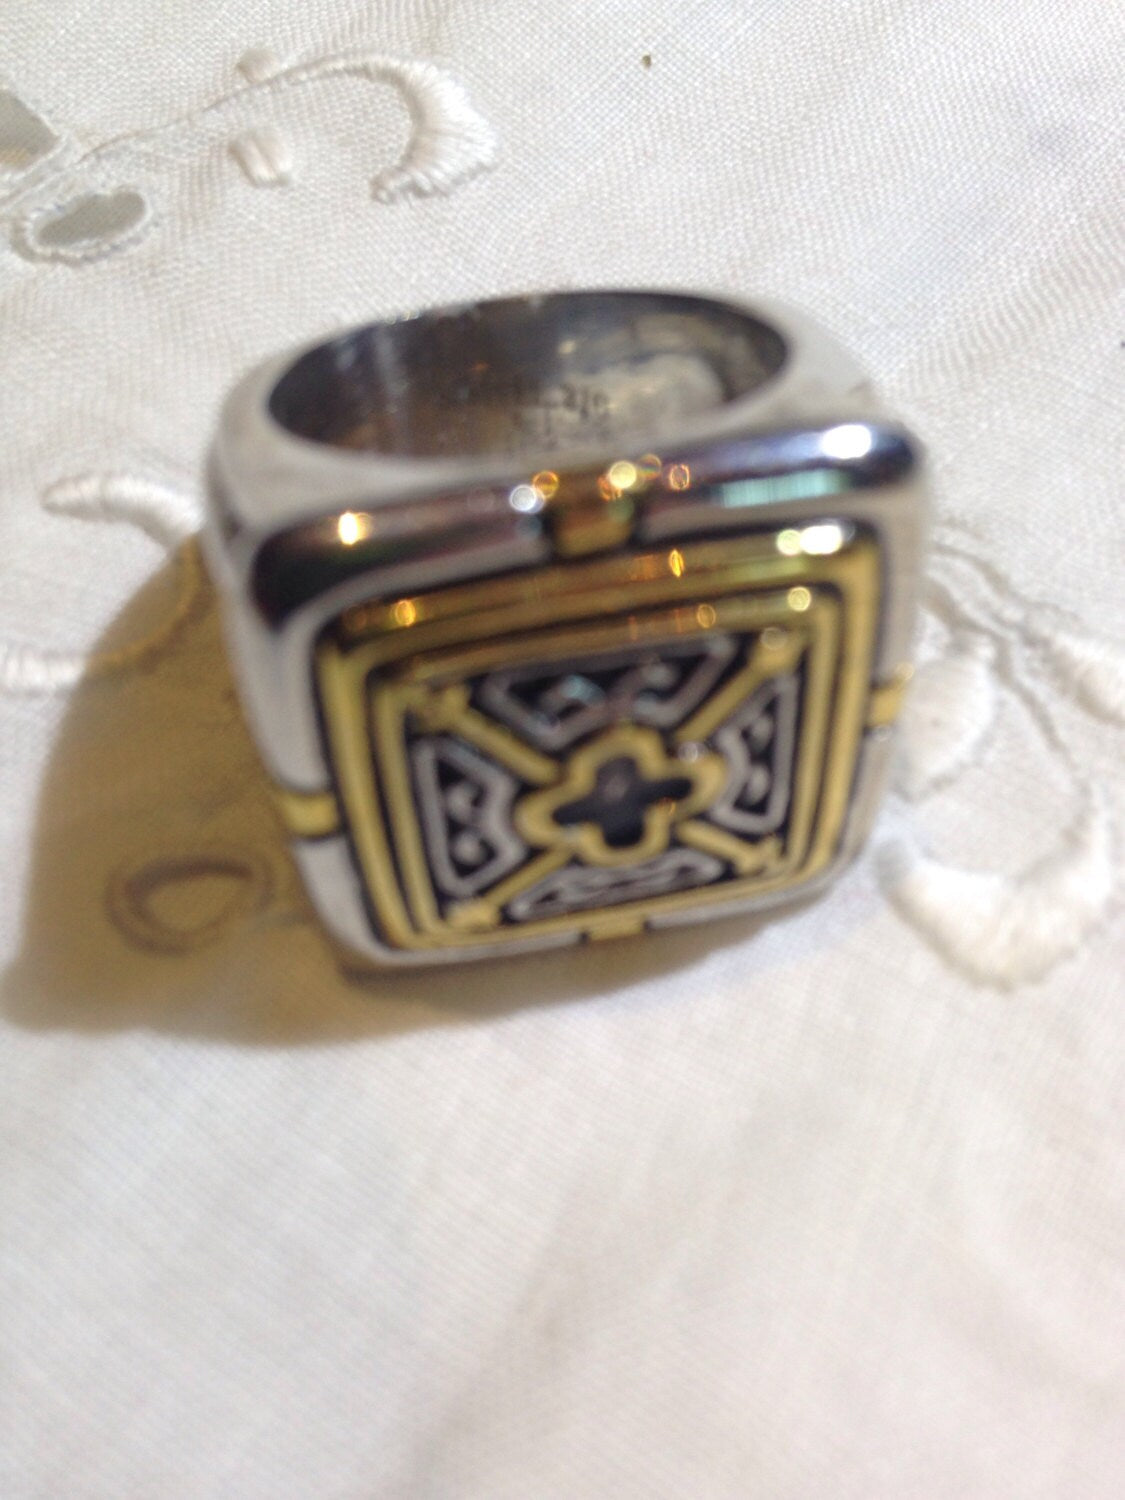 Vintage Gothic Golden Silver Stainless Steel Cross Mens Ring